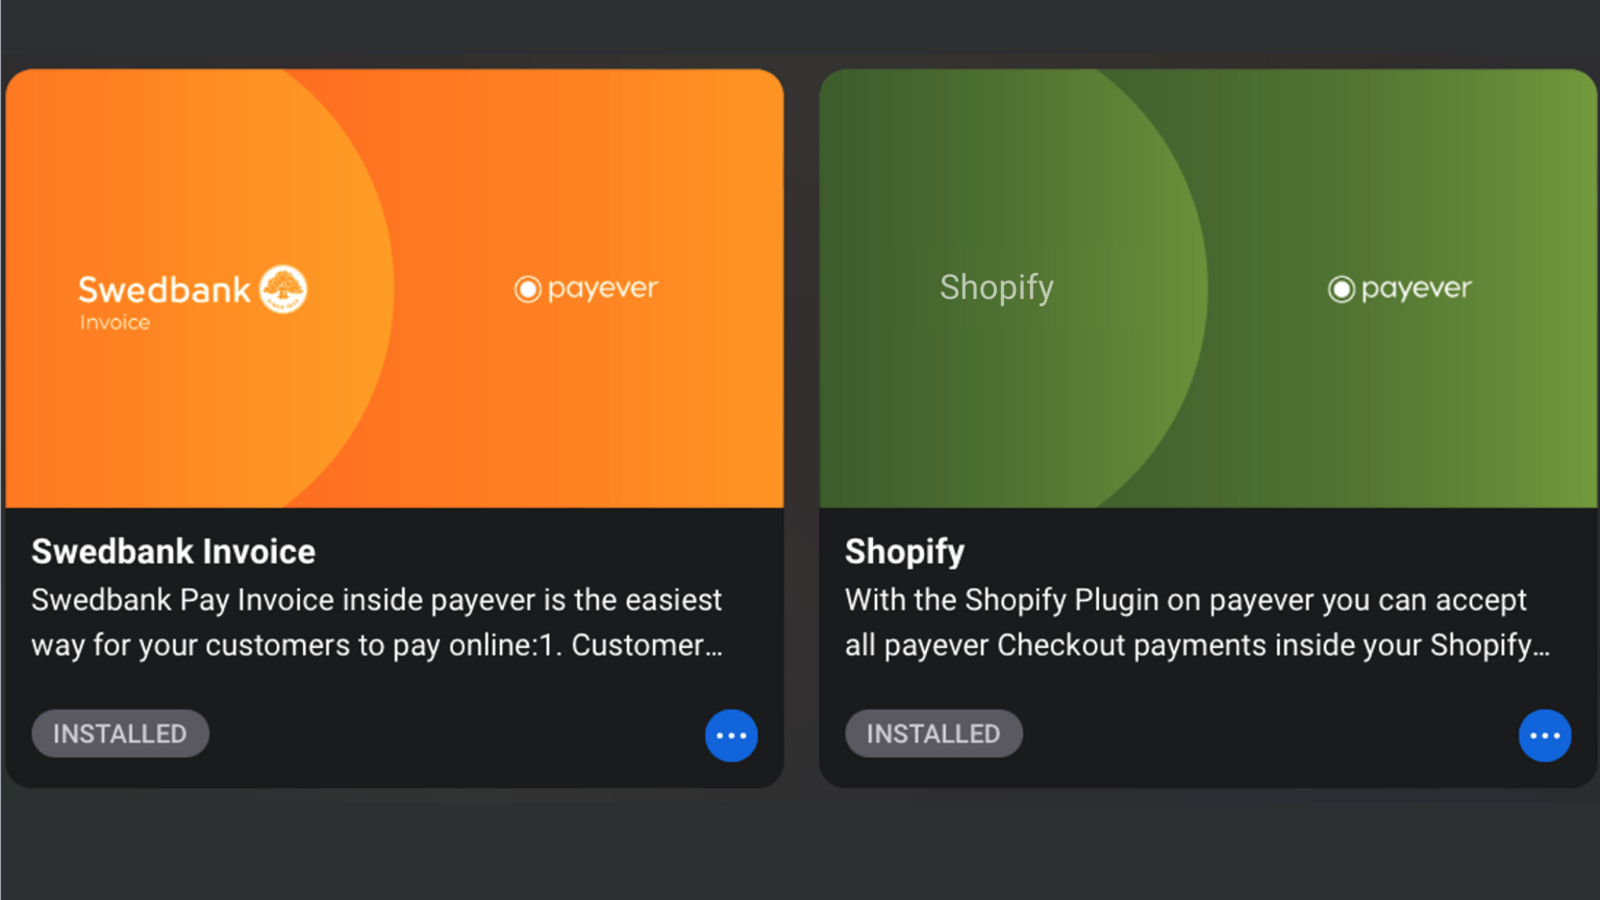 Swedbank and Shopify App in payever